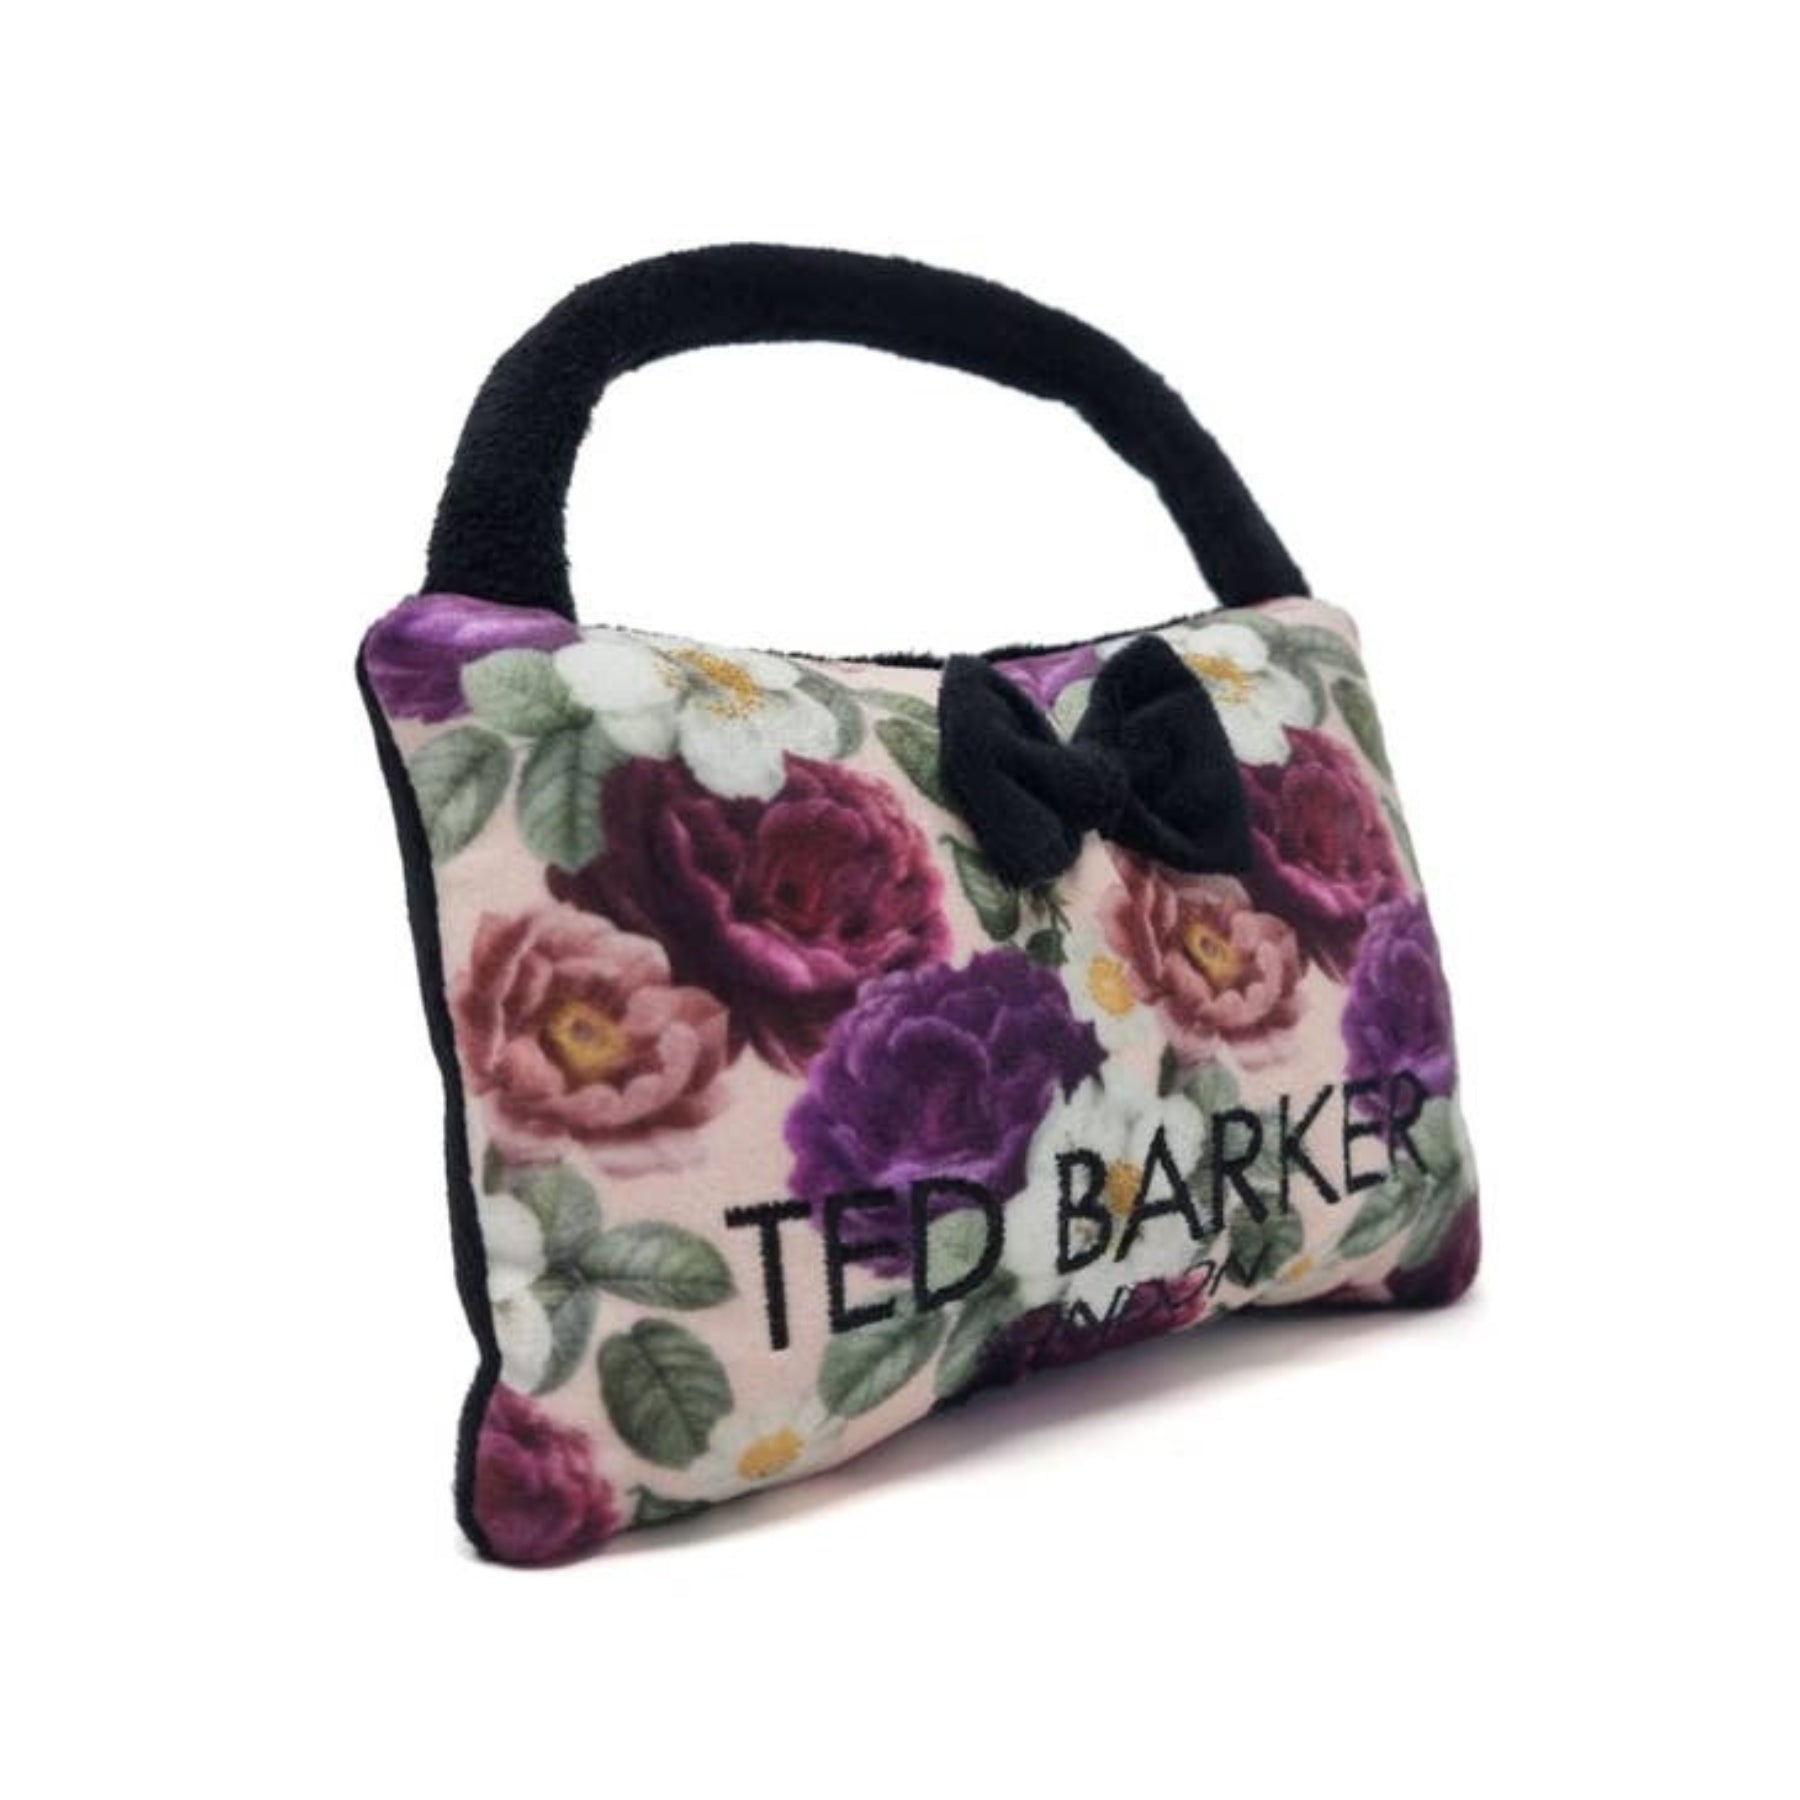 Ted Barker Bag Toy - Pooch Luxury